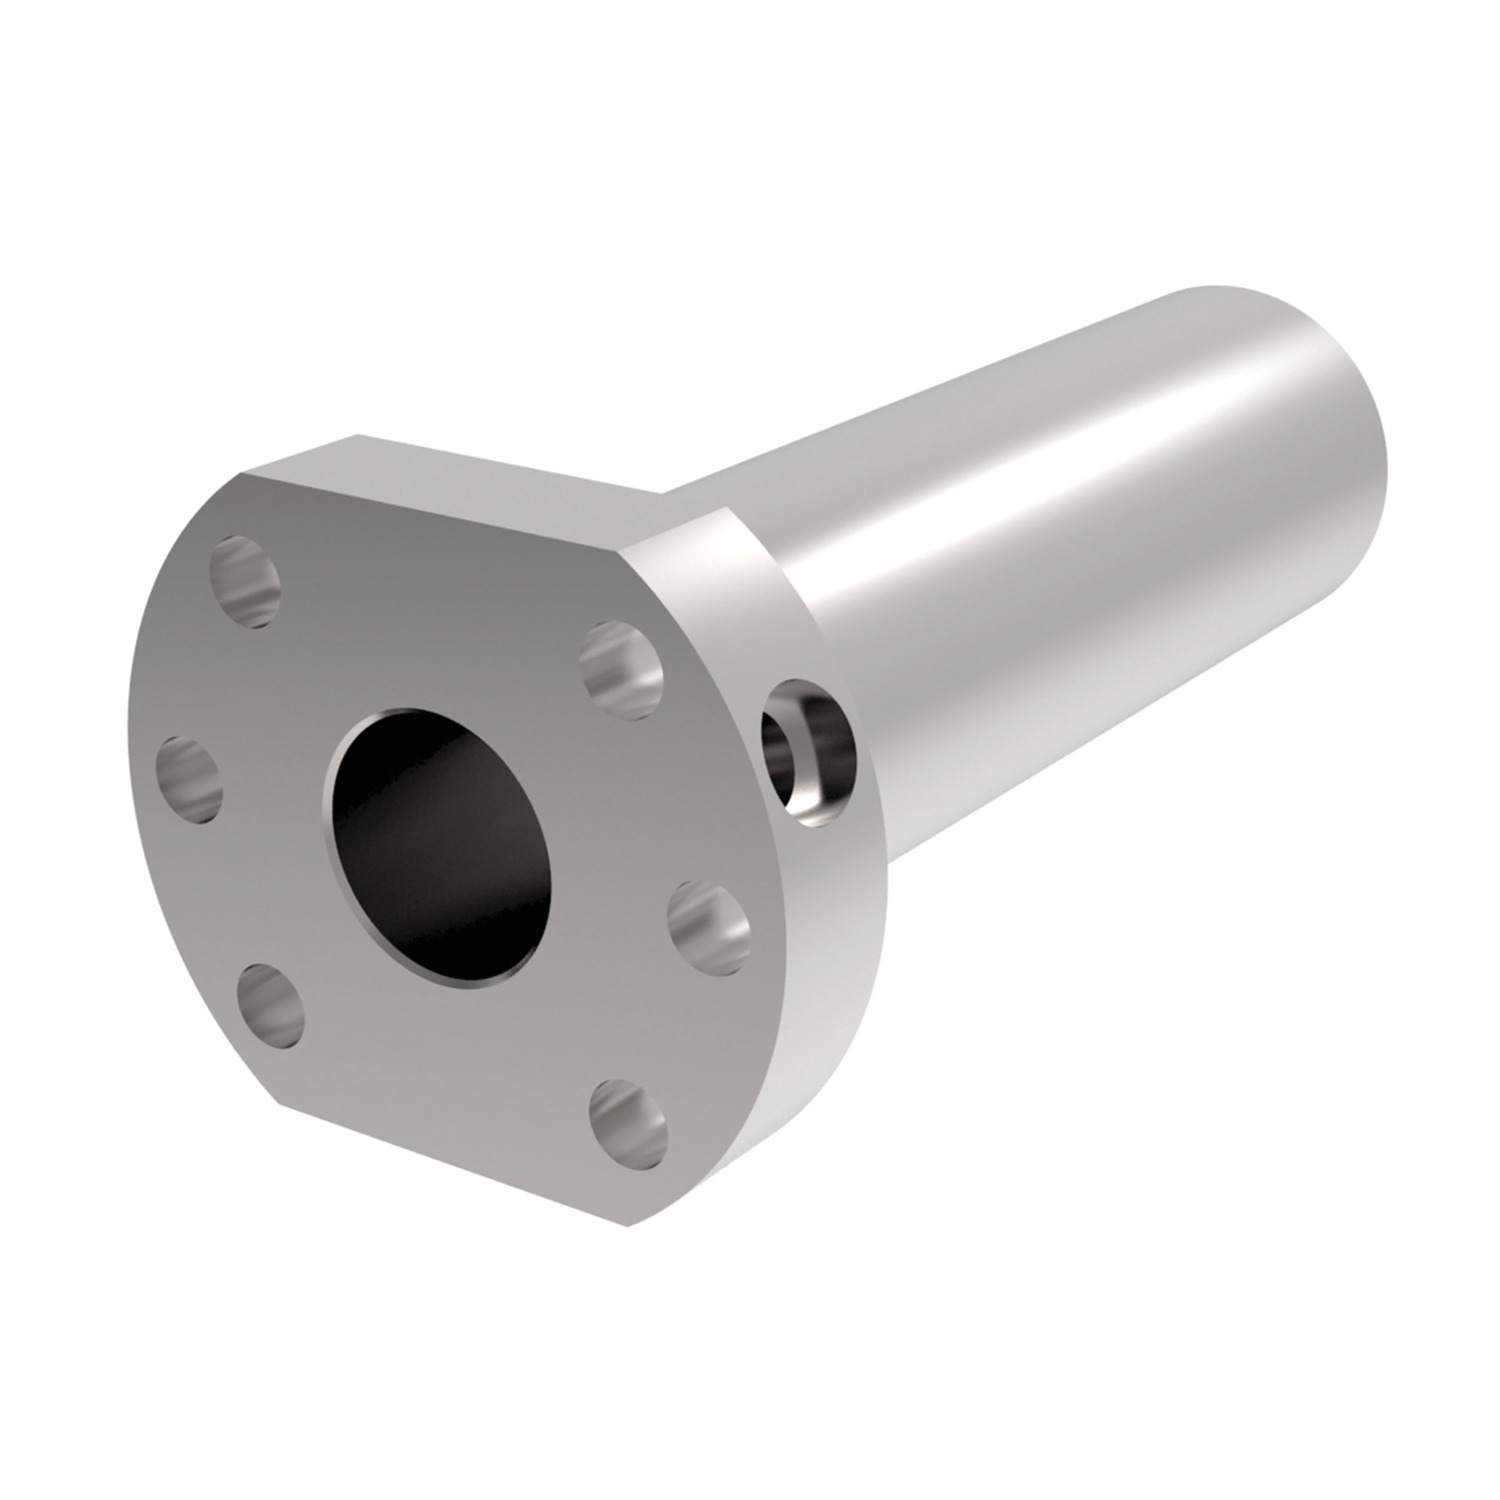 L1371 Flanged Double Ball Nuts